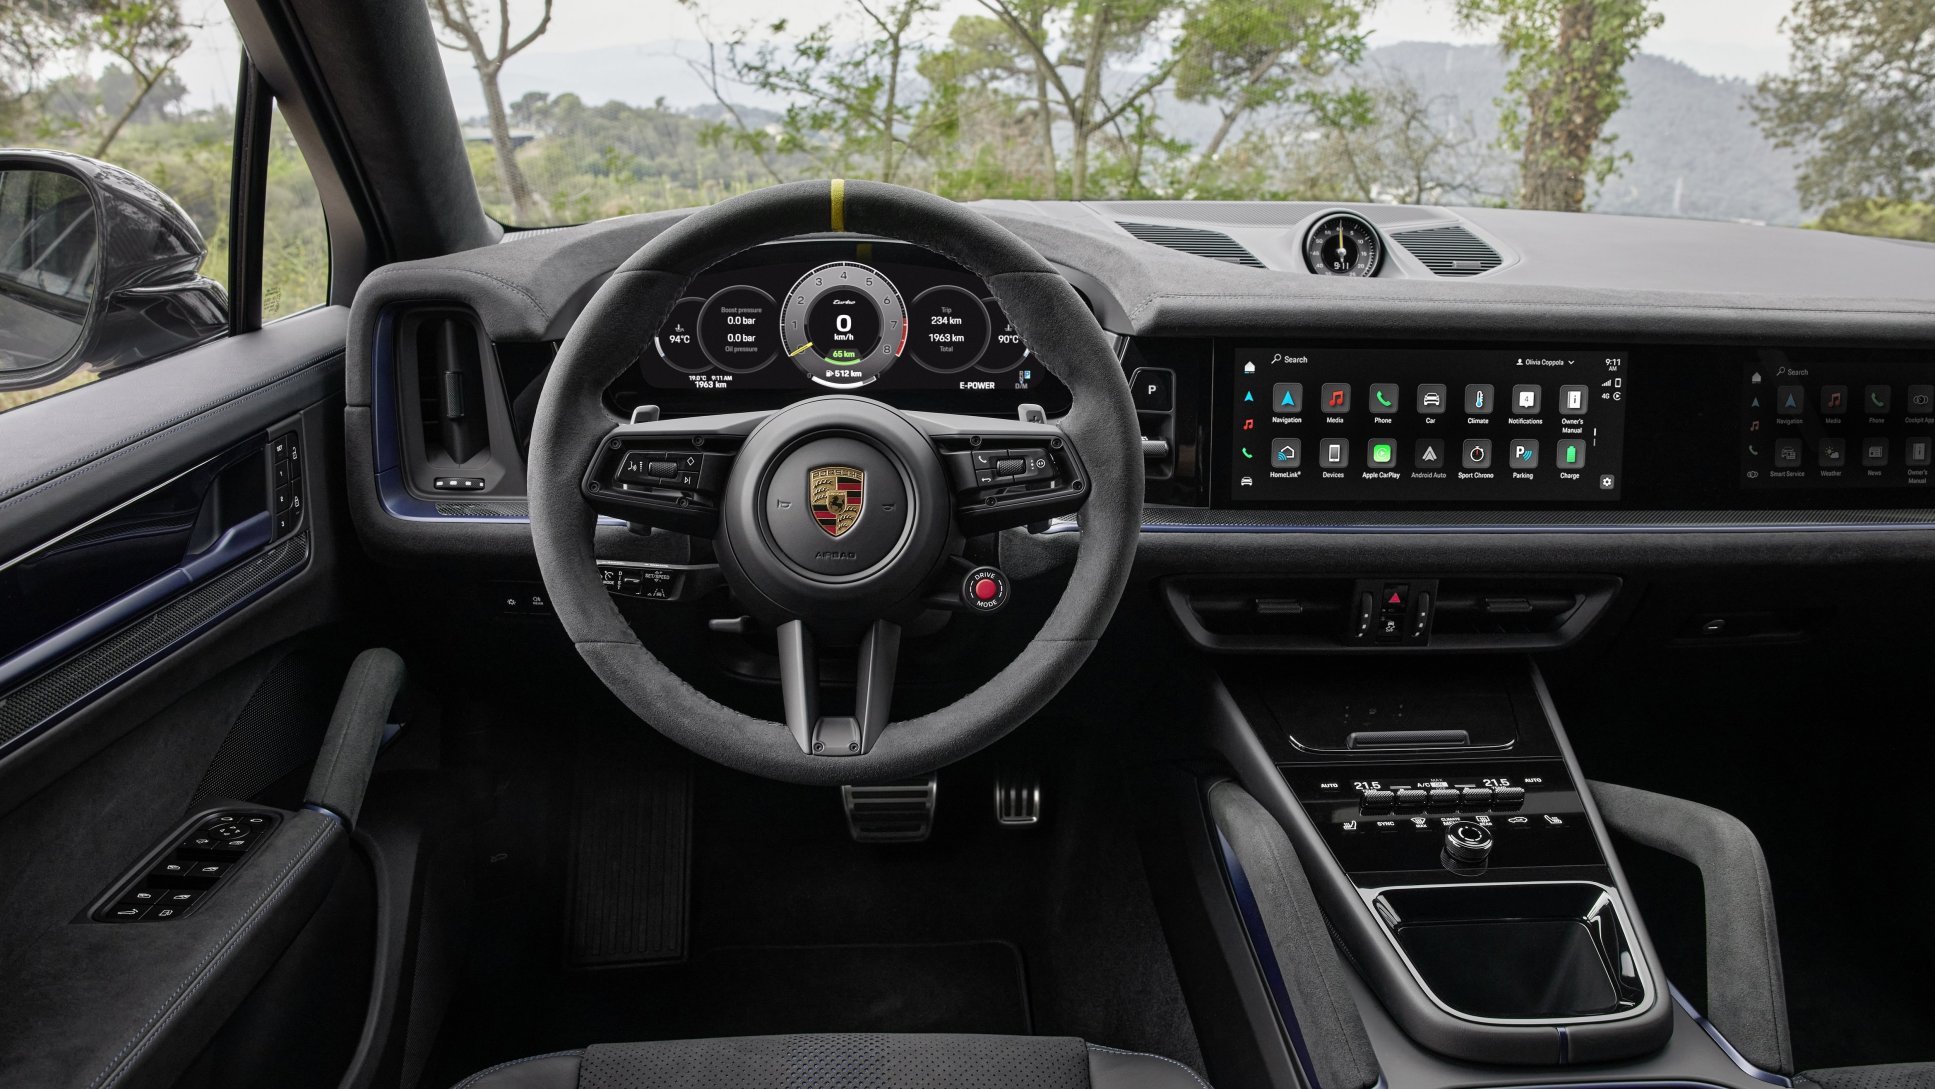 New Porsche Driver Experience makes its debut in the Cayenne - Porsche  Newsroom USA